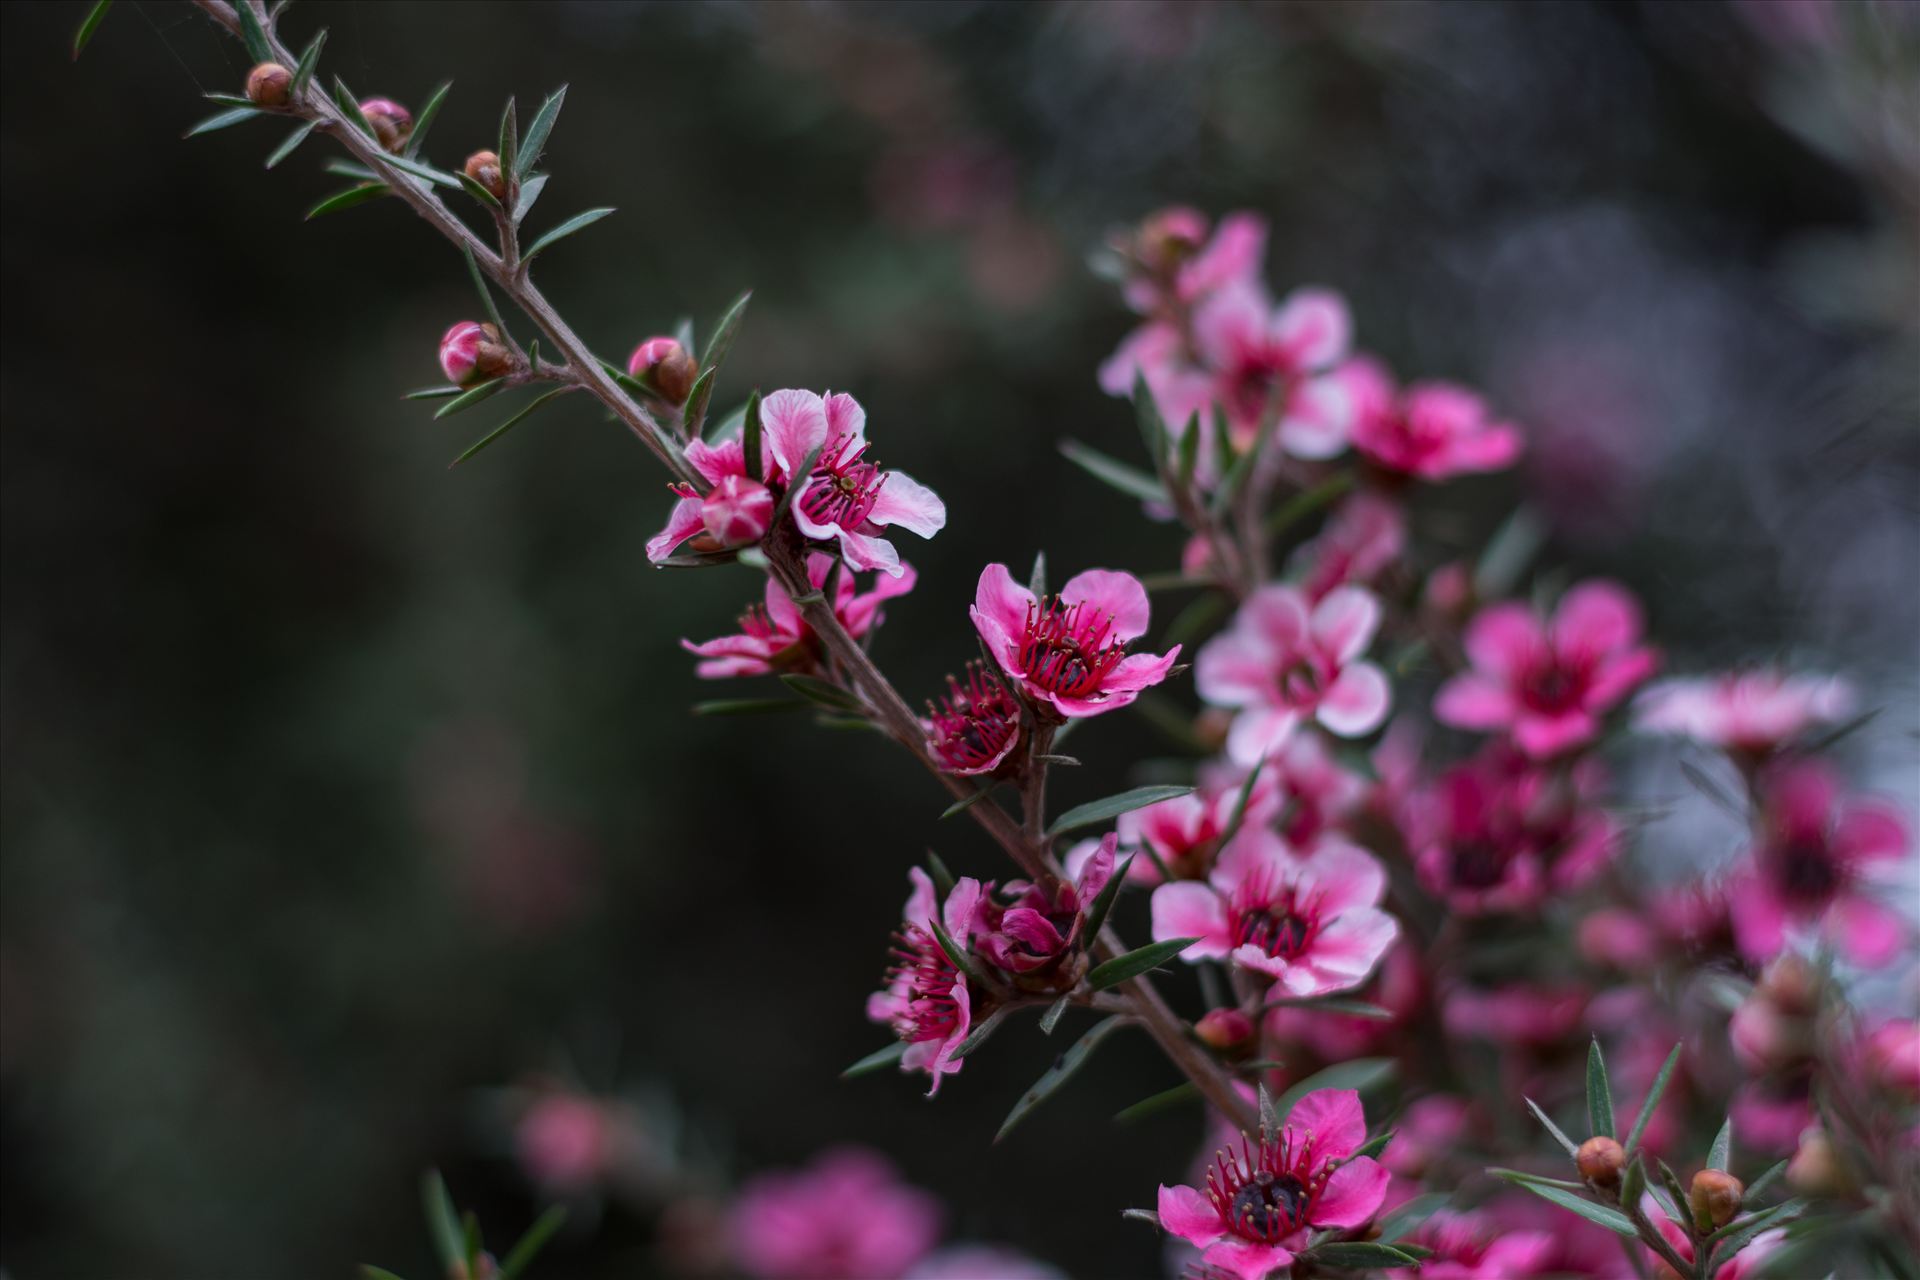 Pink Blossoms 2 10252015.jpg - Pretty pink blossoms in the early morning light on the Central Coast of California. by Sarah Williams